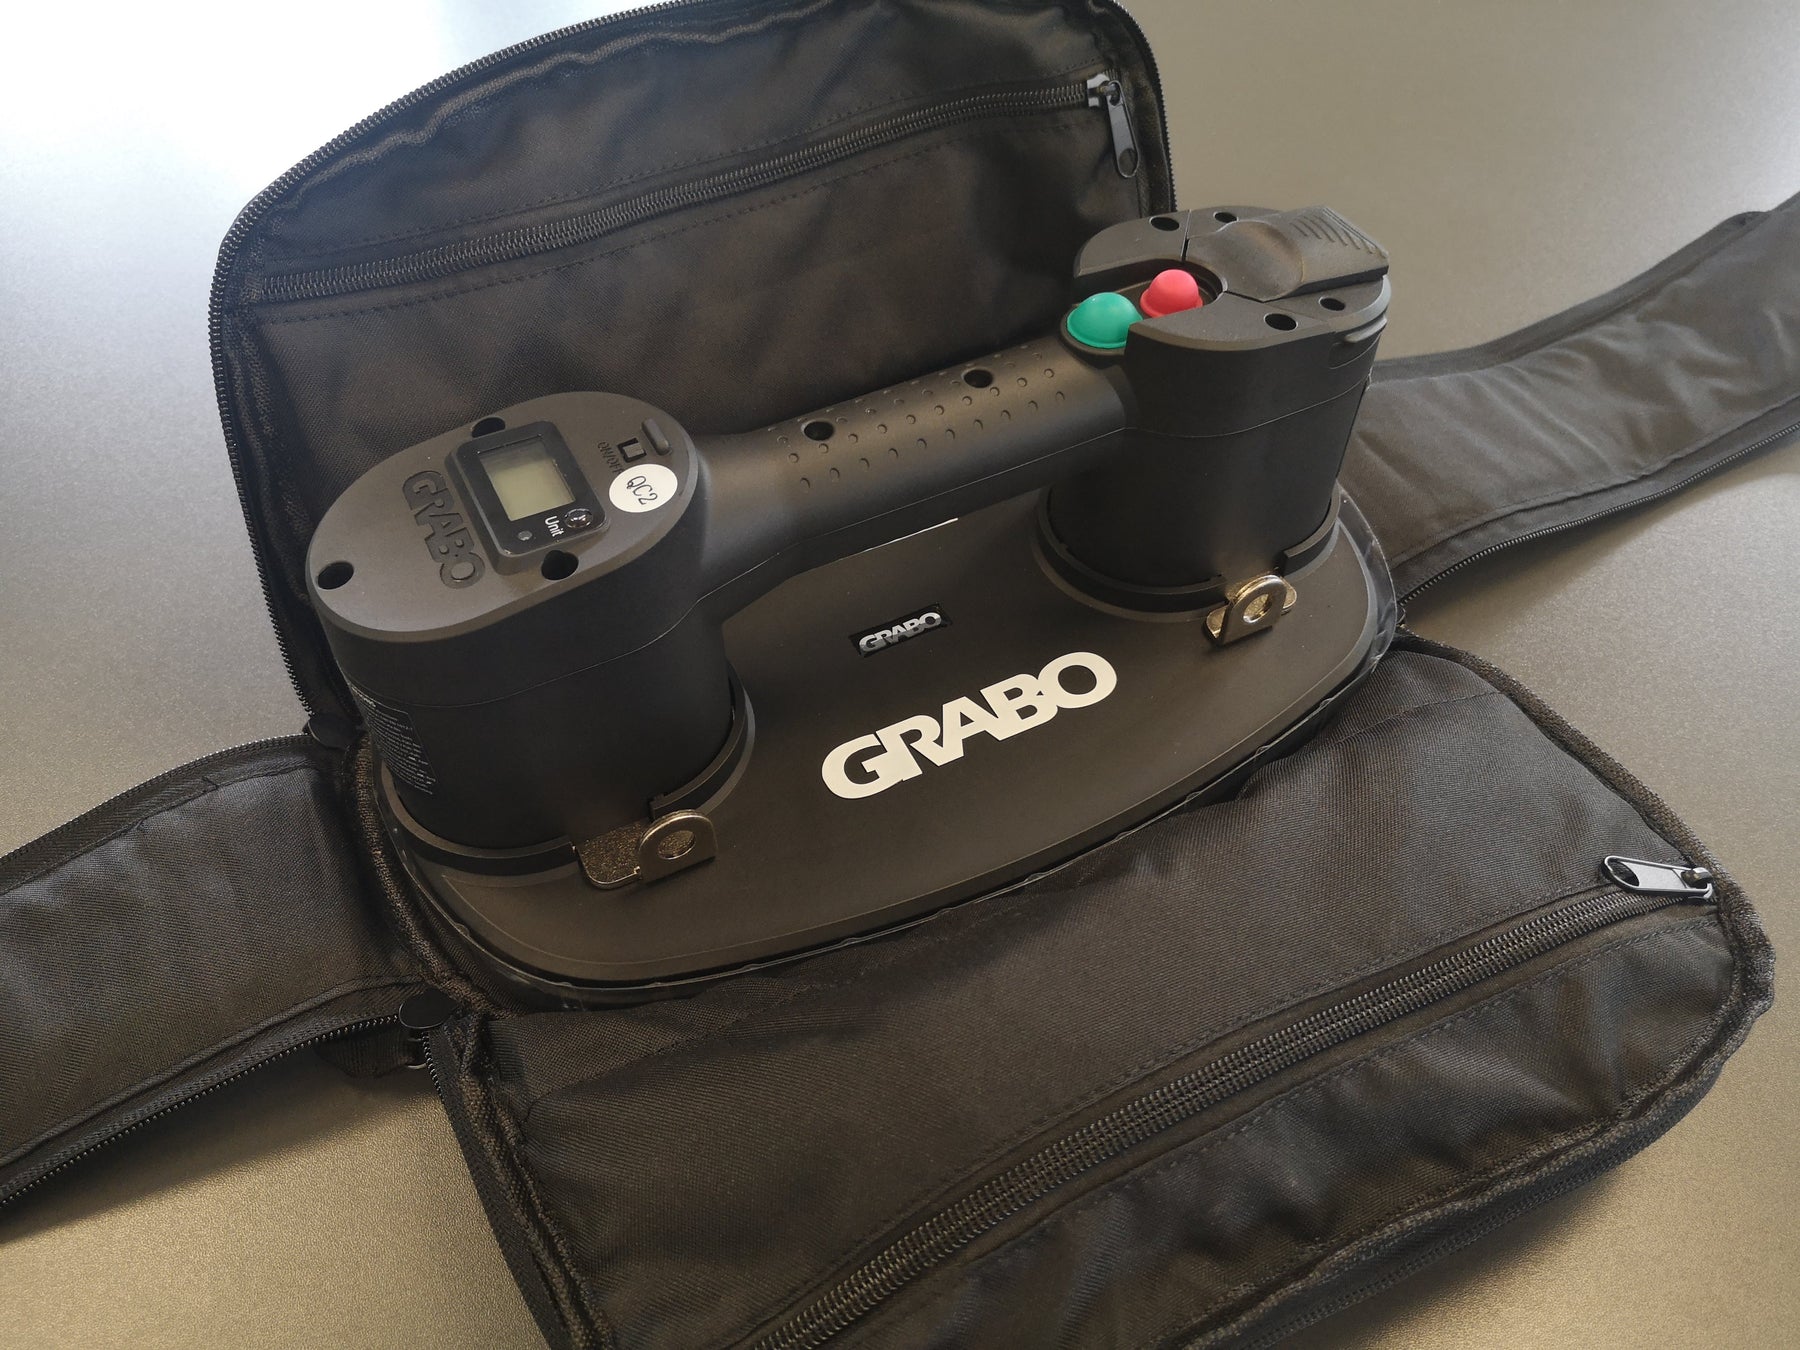 SAVE £25 - GRABO PRO - TWIN PACK